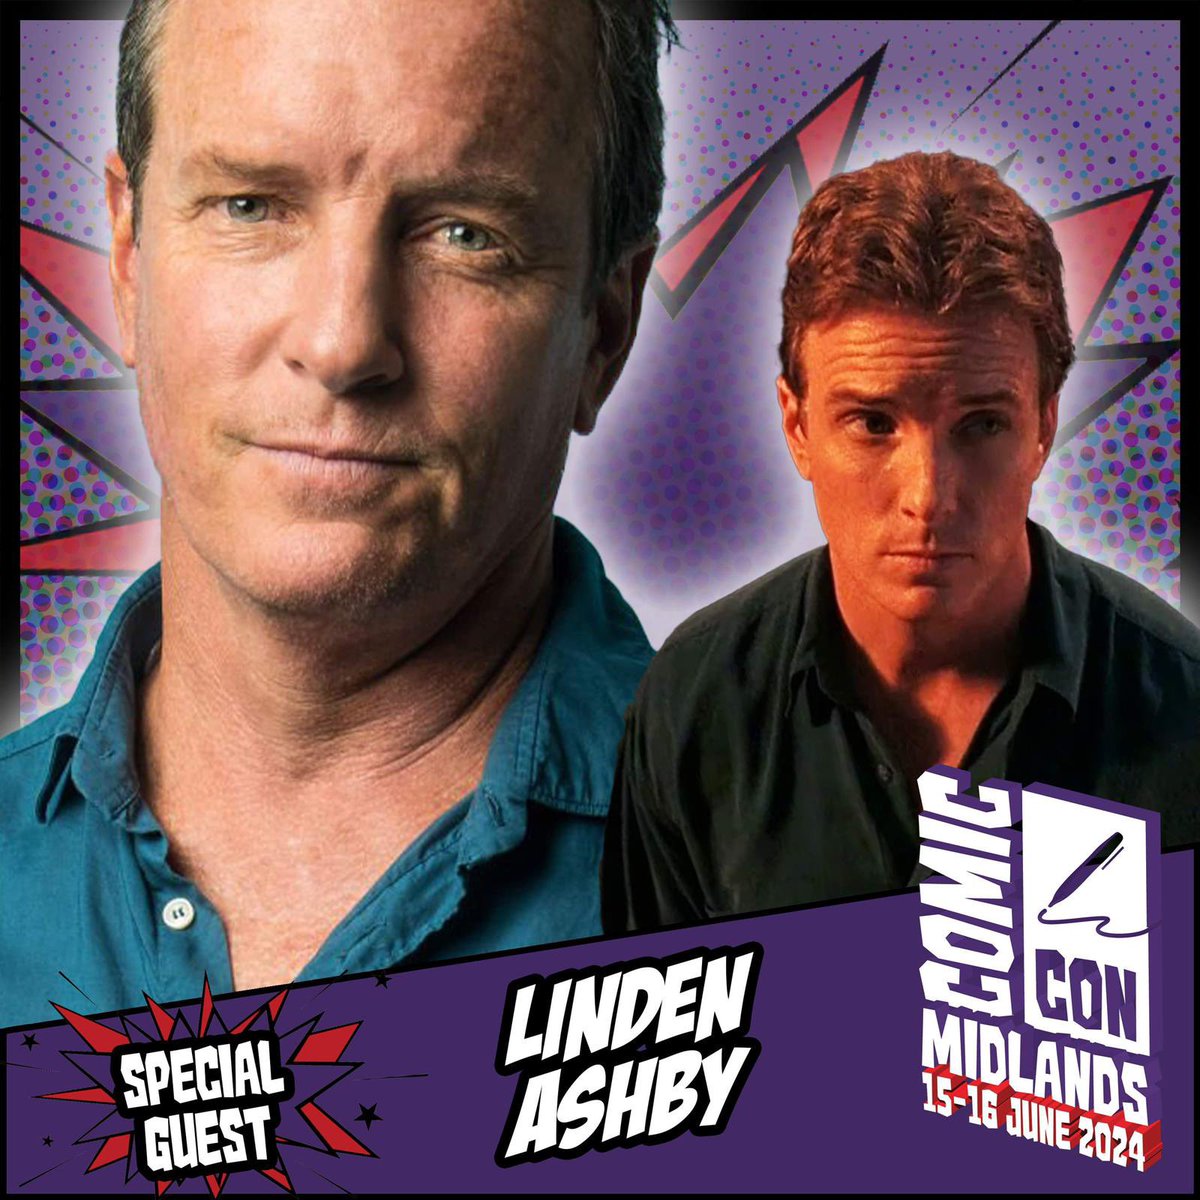 Comic Con Midlands welcomes Linden Ashby, known for projects such as Mortal Kombat, Teen Wolf, Purple Hearts, Dark Angel, and many more. Appearing 15-16 June! Tickets: comicconventionmidlands.co.uk